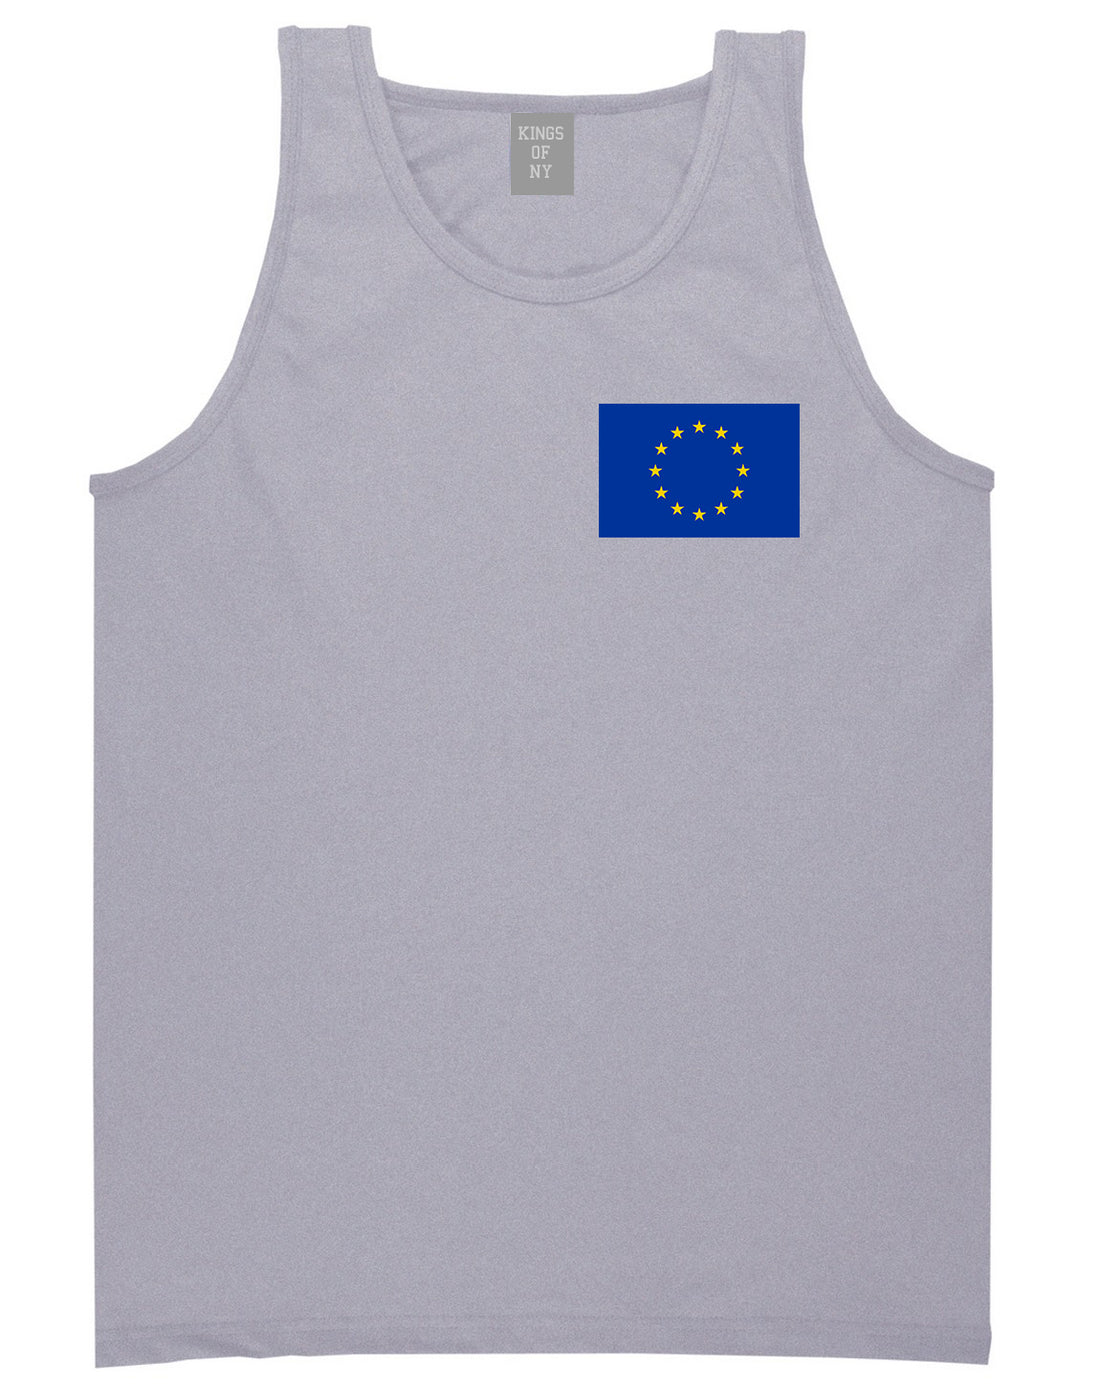 European Union Flag Chest Mens Grey Tank Top Shirt by KINGS OF NY